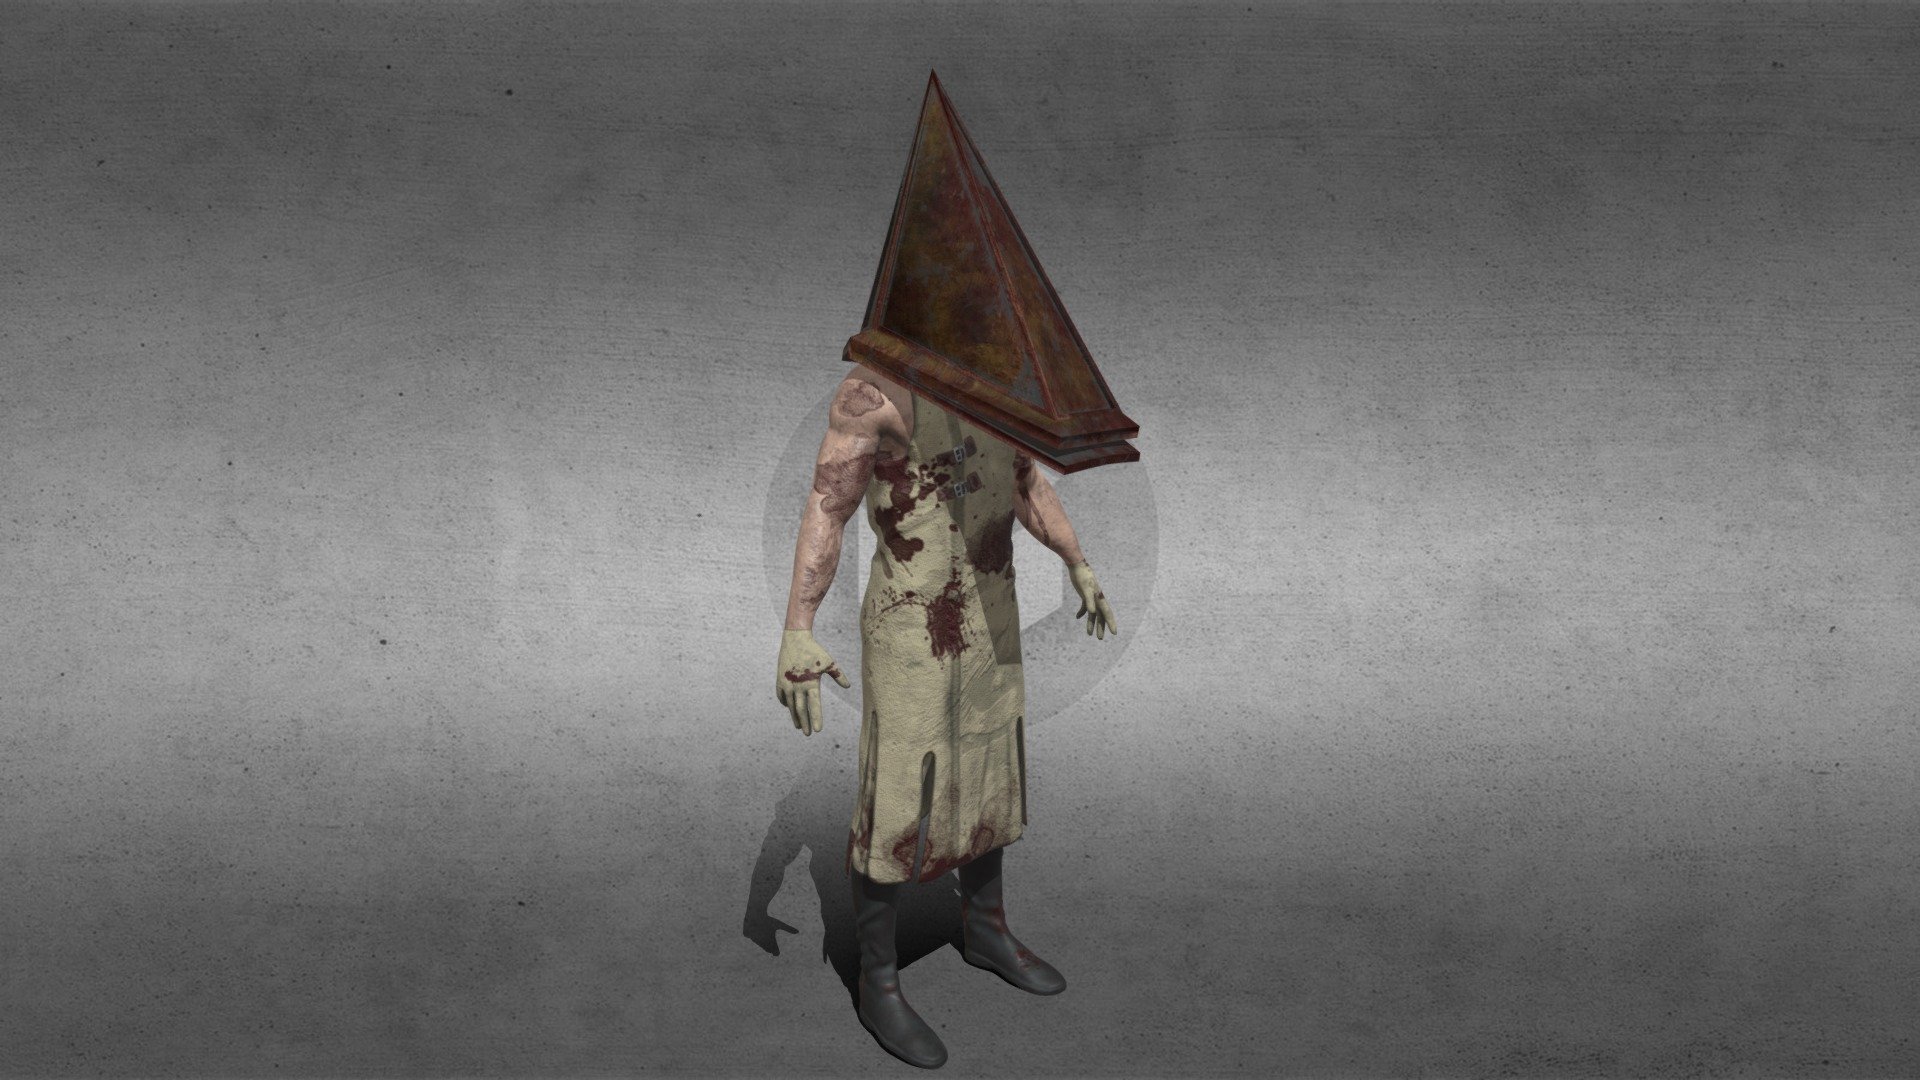 Hello ! im a bachelor 2 3D student from Ynov Aix Campus in france,
Let me introduce you my personnal project : PyramidHead, from Silent Hill - Pyramid Head From SilentHill - 3D model by Lucas.Boggero 3d model